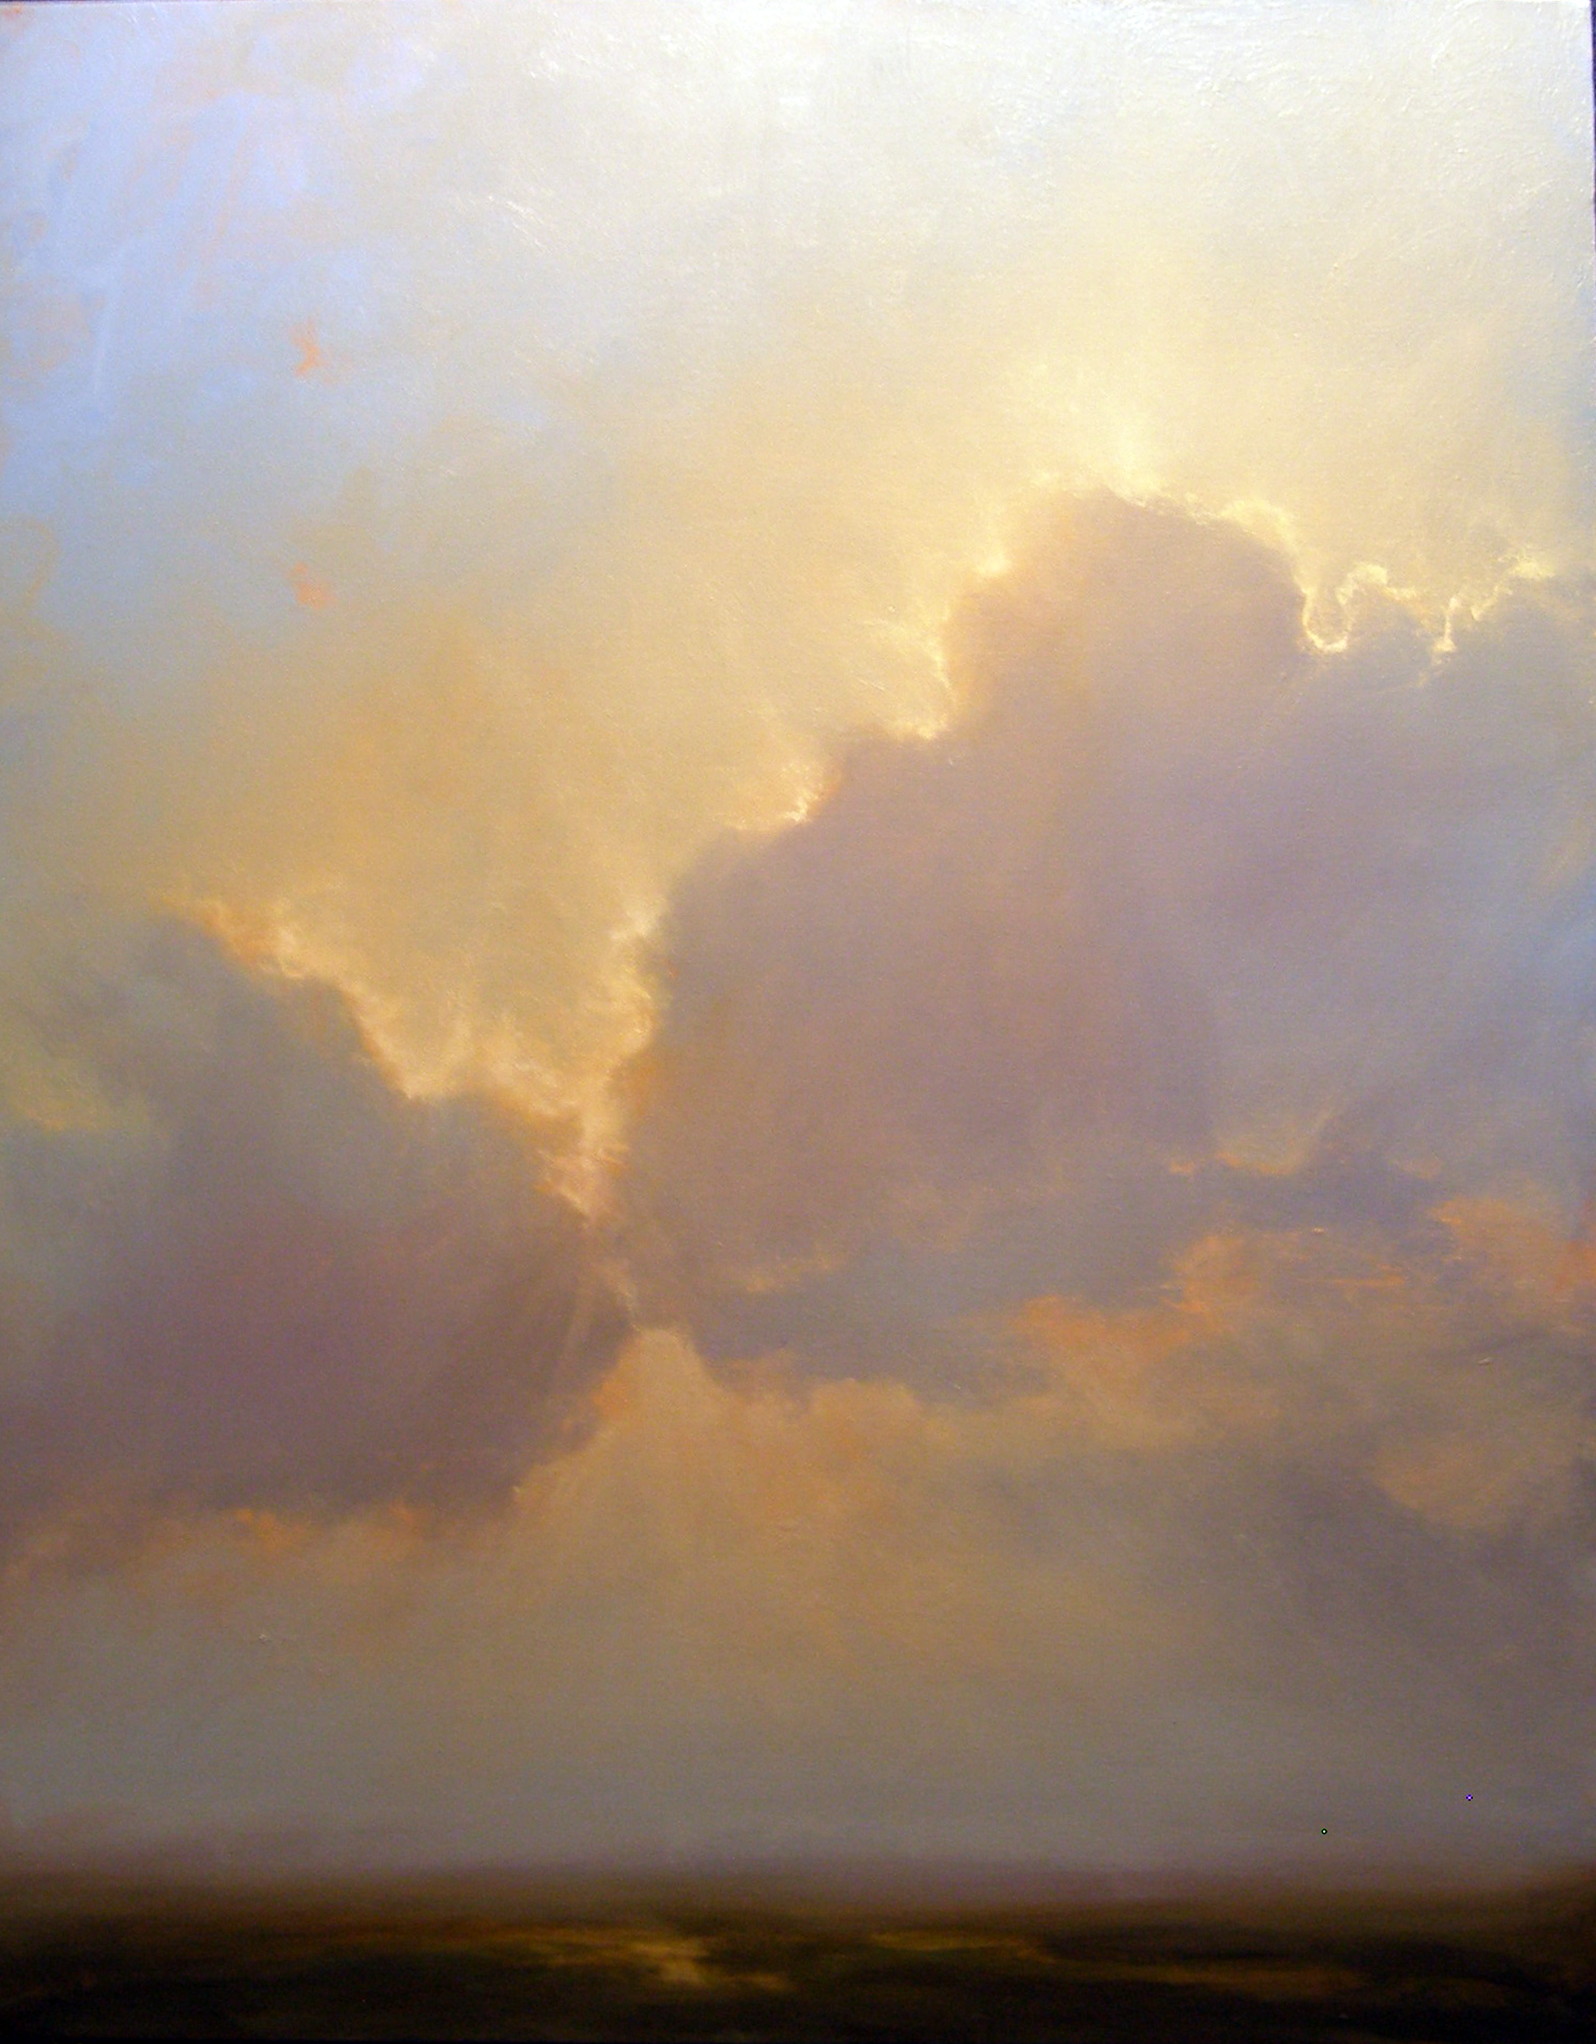   I’m a painter. I use the sky in my paintings as a metaphor for consciousness and approach painting clouds very much the same way as I would if I were painting someone's portrait. Clouds are in constant motion, always changing form and evolving, alw